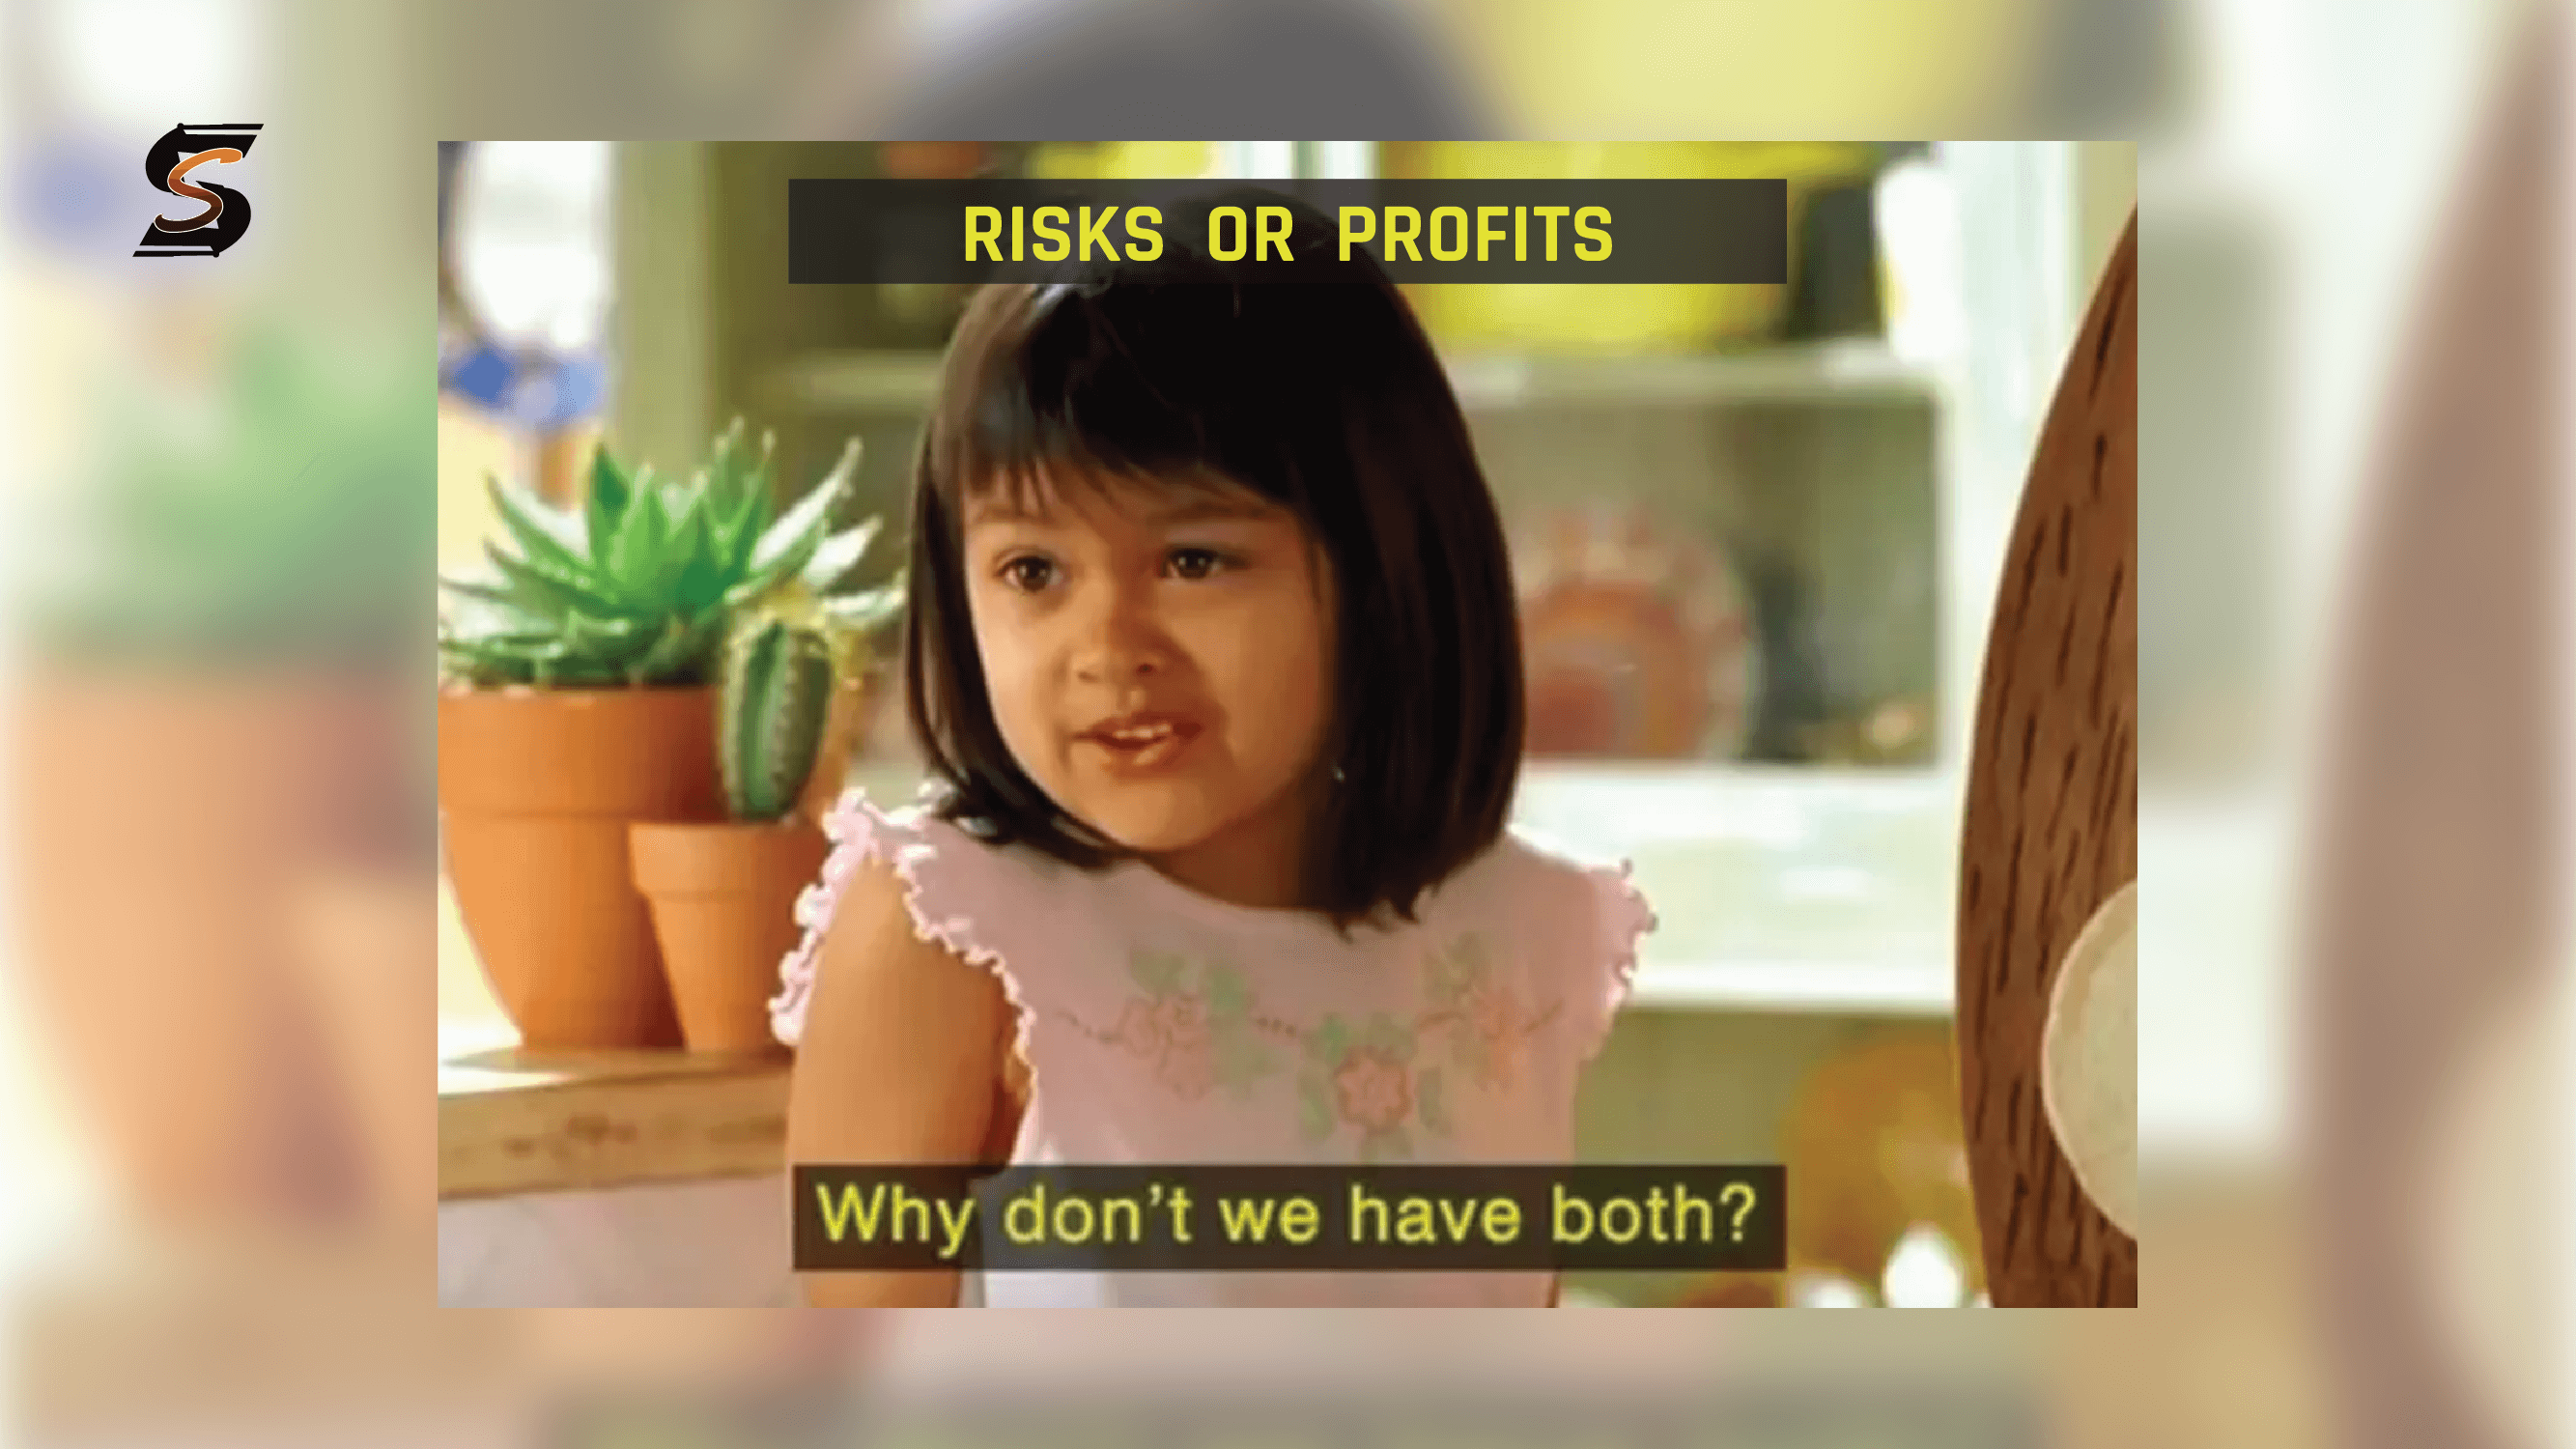 Featured image for “PRIORITIZING RISKS OR PROFITS?”